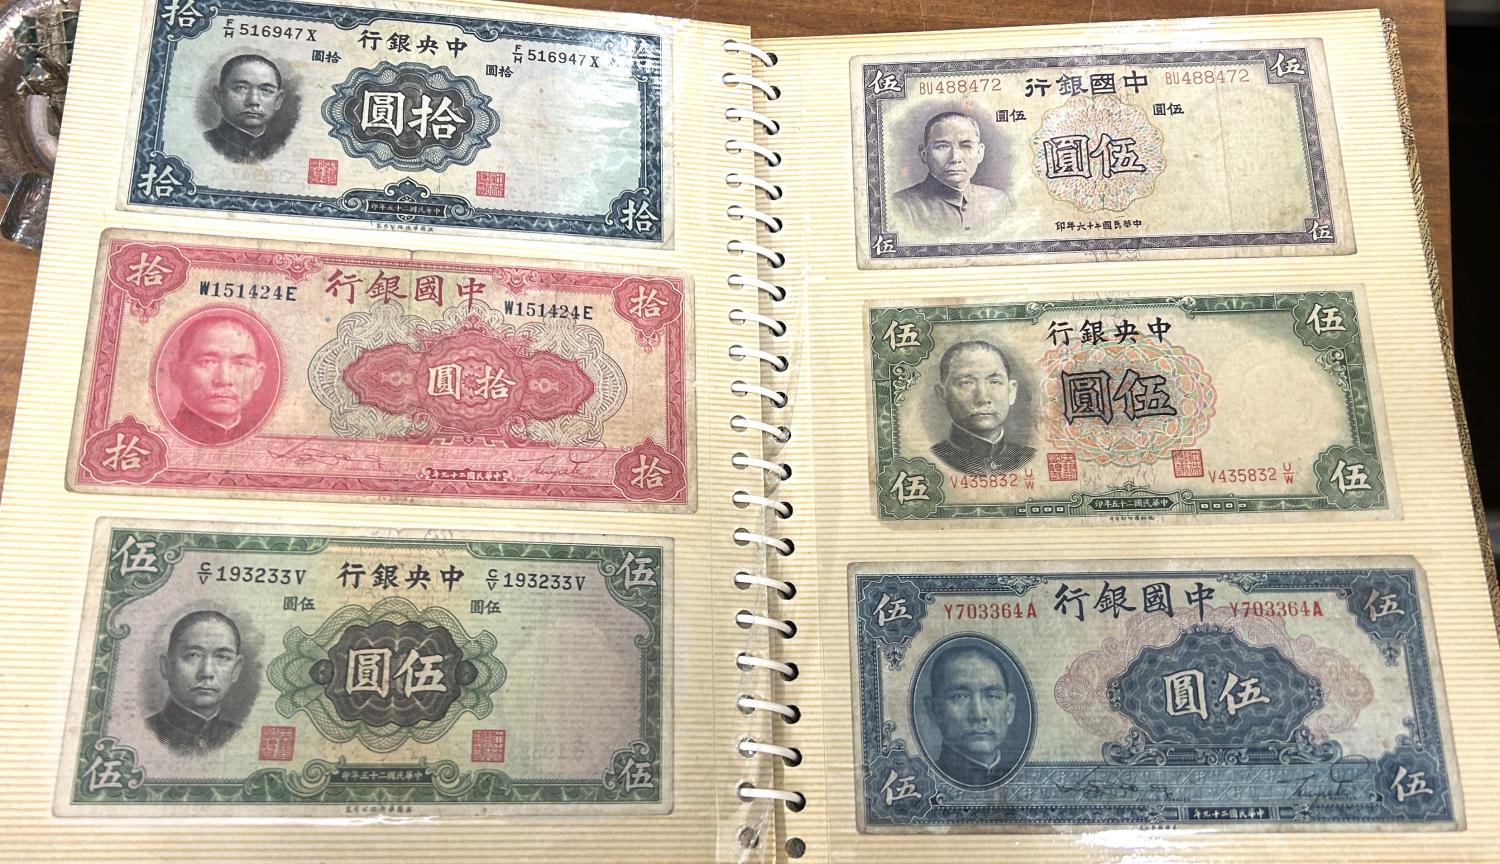 A well presented album of world bank notes including Chinese, English, Scottish, German, Japanese